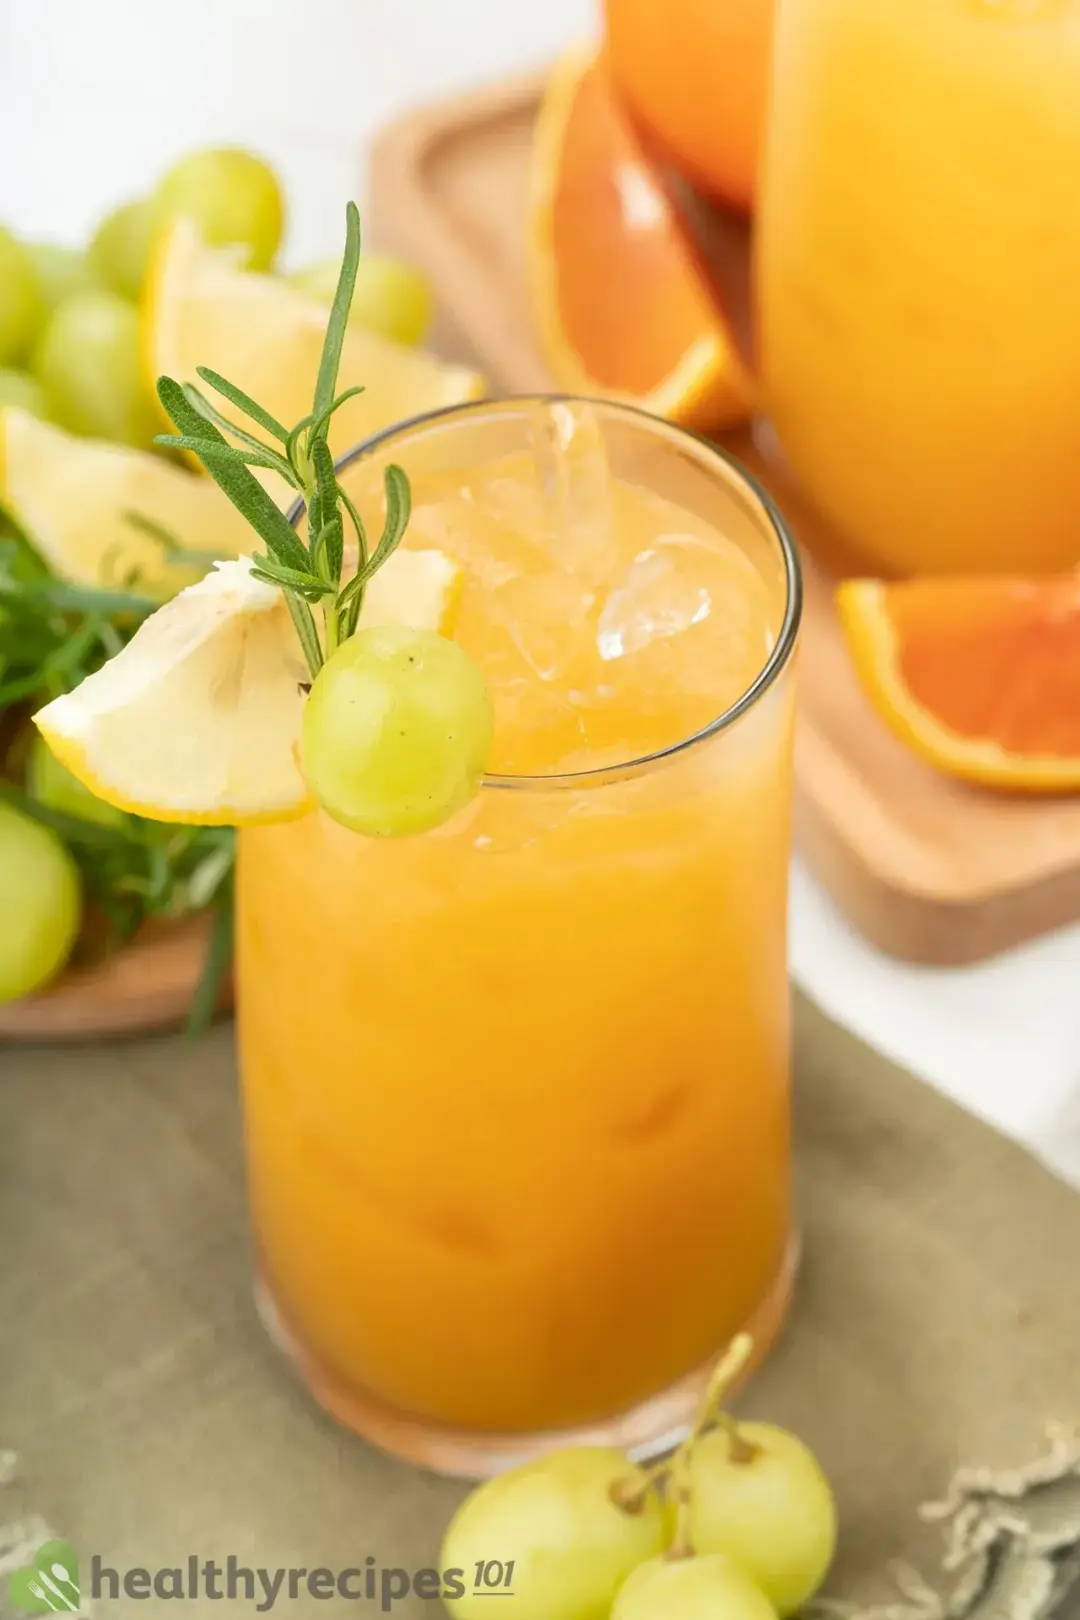 A tall glass of iced grapefruit drink topped with a rosemary sprig and put next to grapes